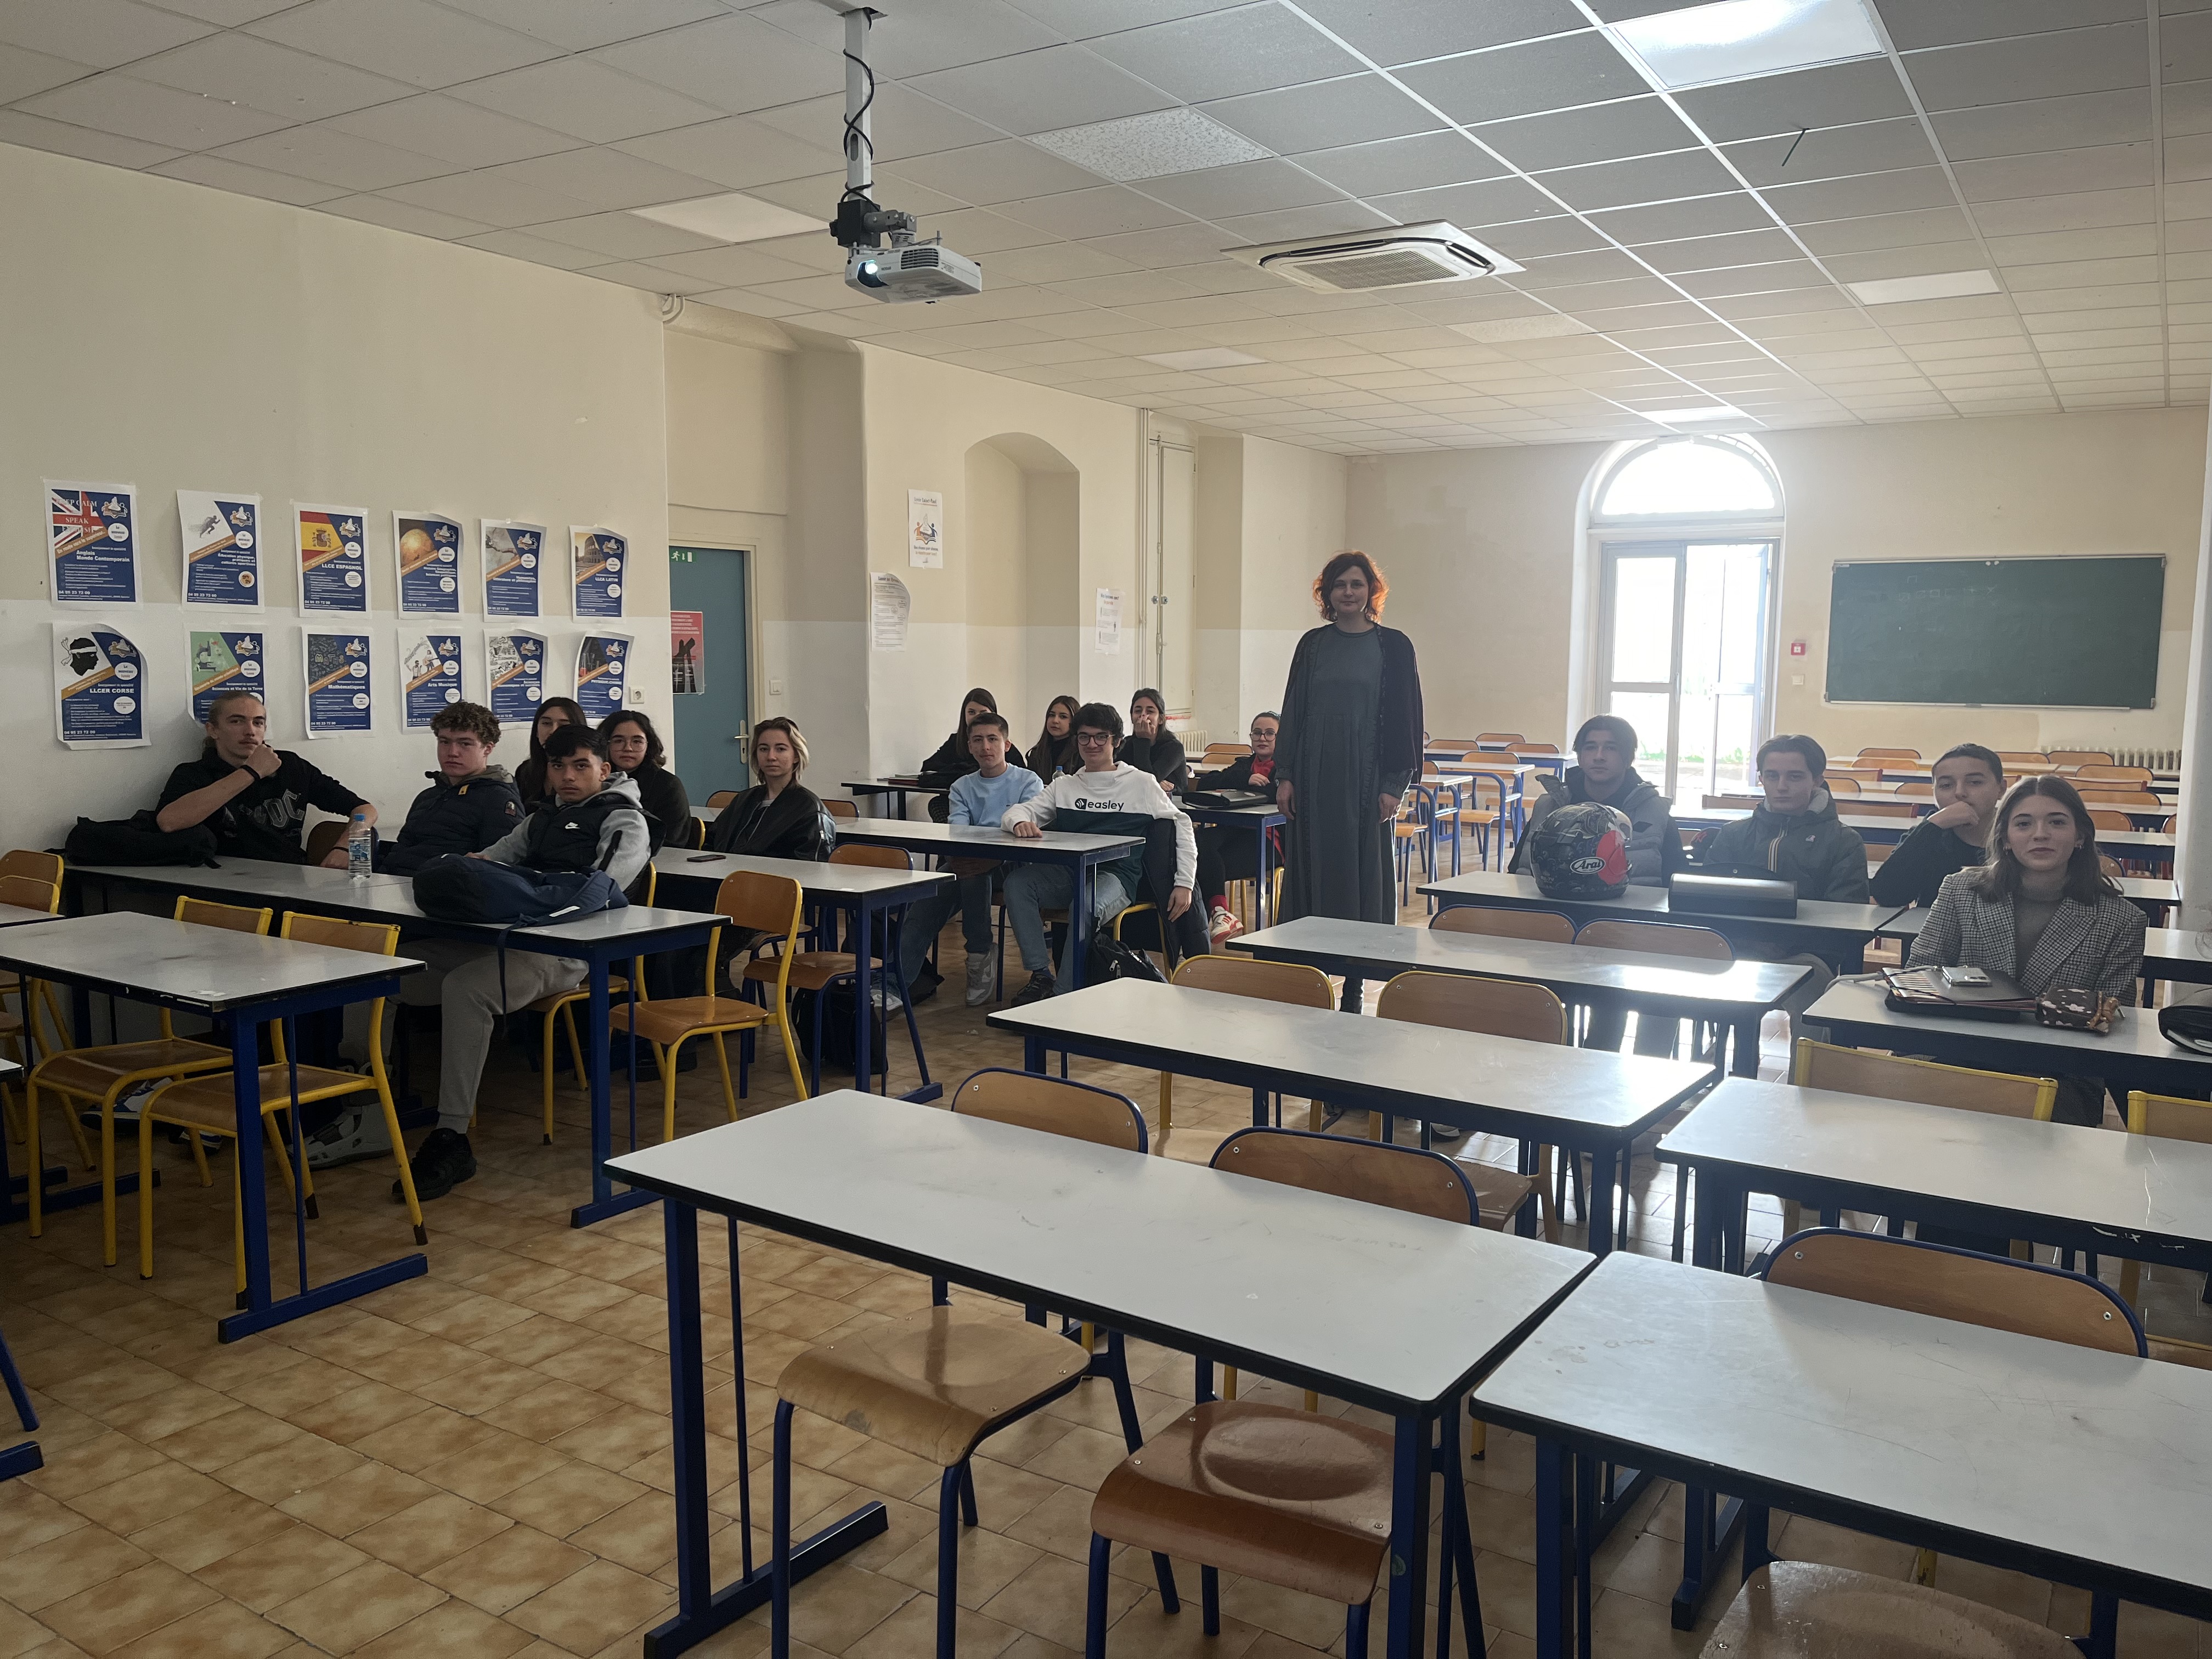 Students from St Paul’s High School in Ajaccio introduced audiovisual translation